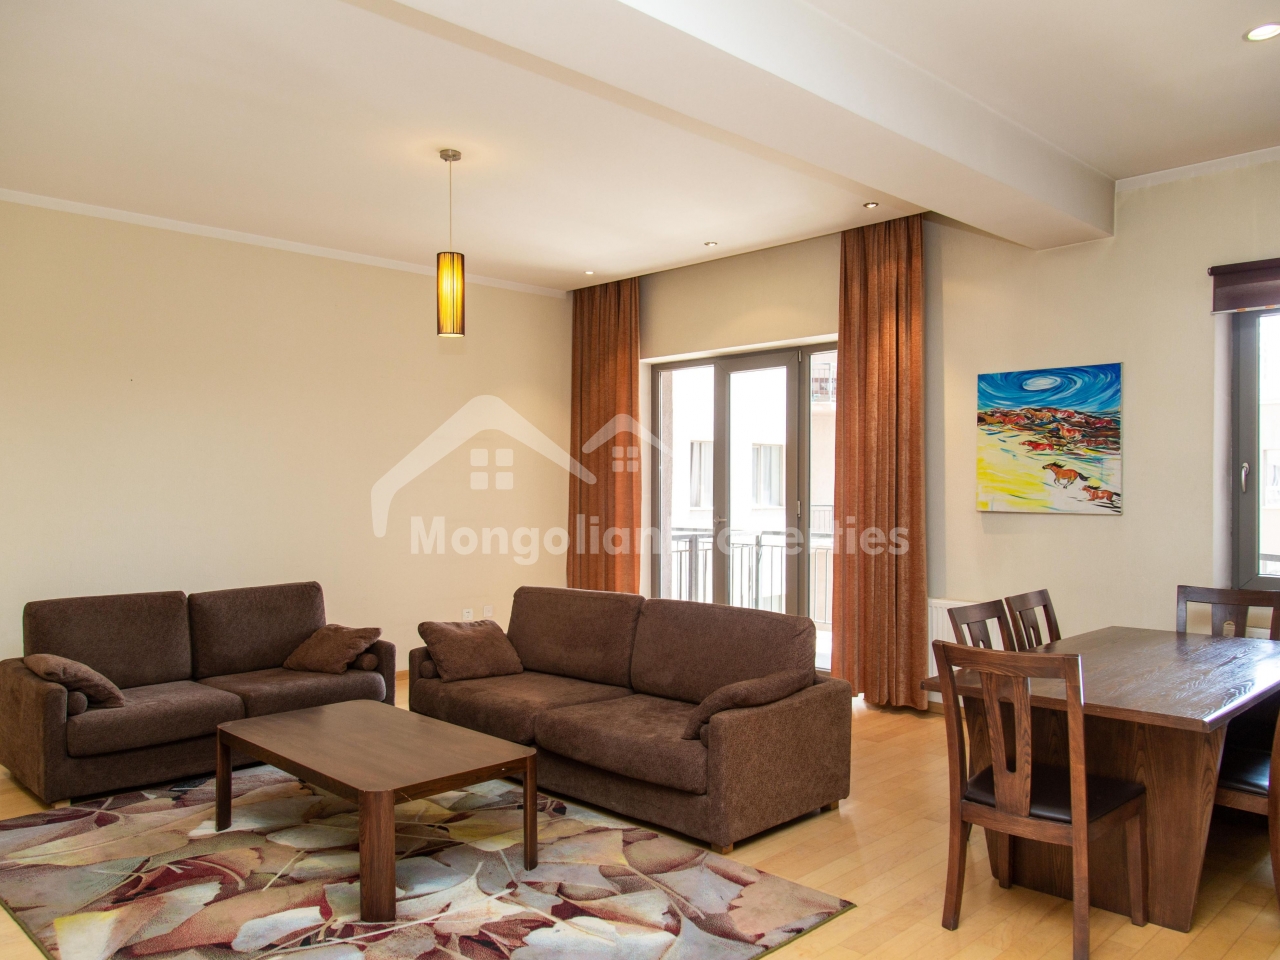 FOR SALE: 2 bedroom apartment for sale at Regency Residence